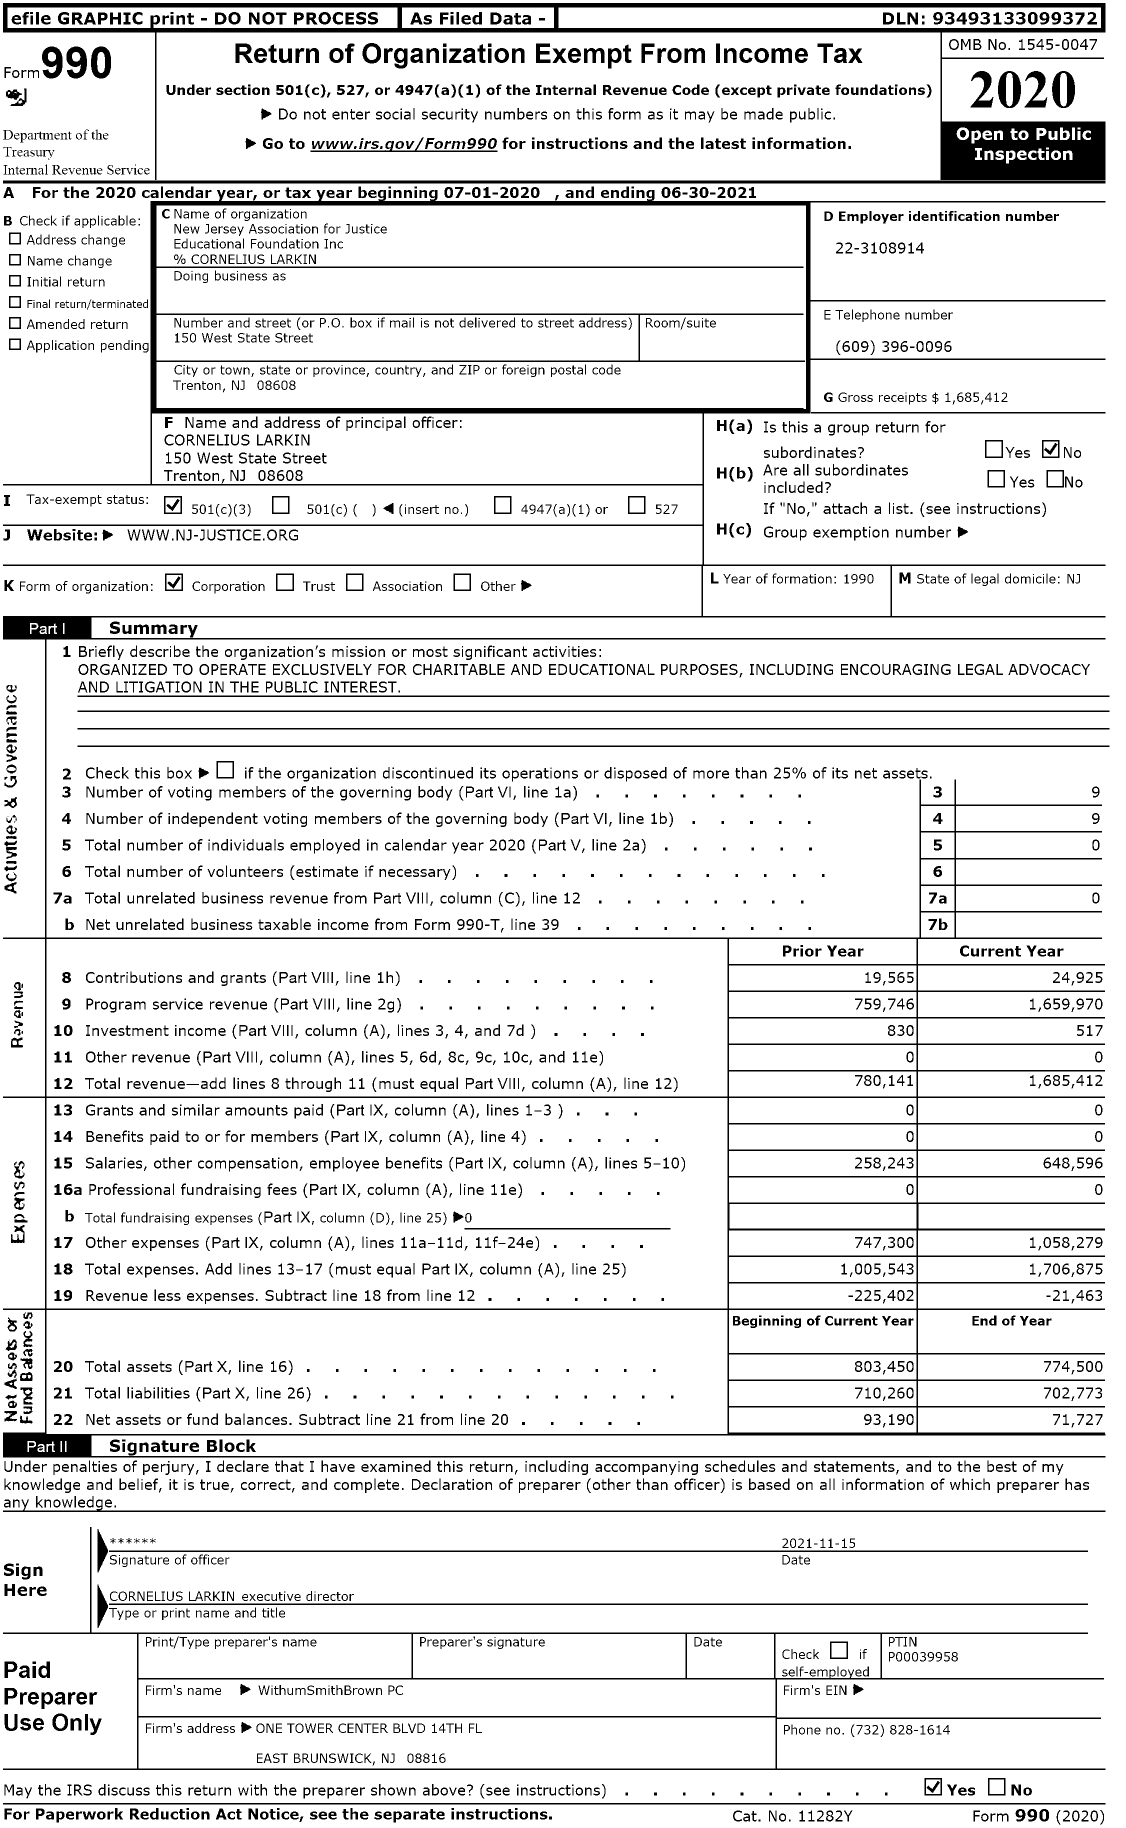 Image of first page of 2020 Form 990 for New Jersey Association for Justice Educational Foundation